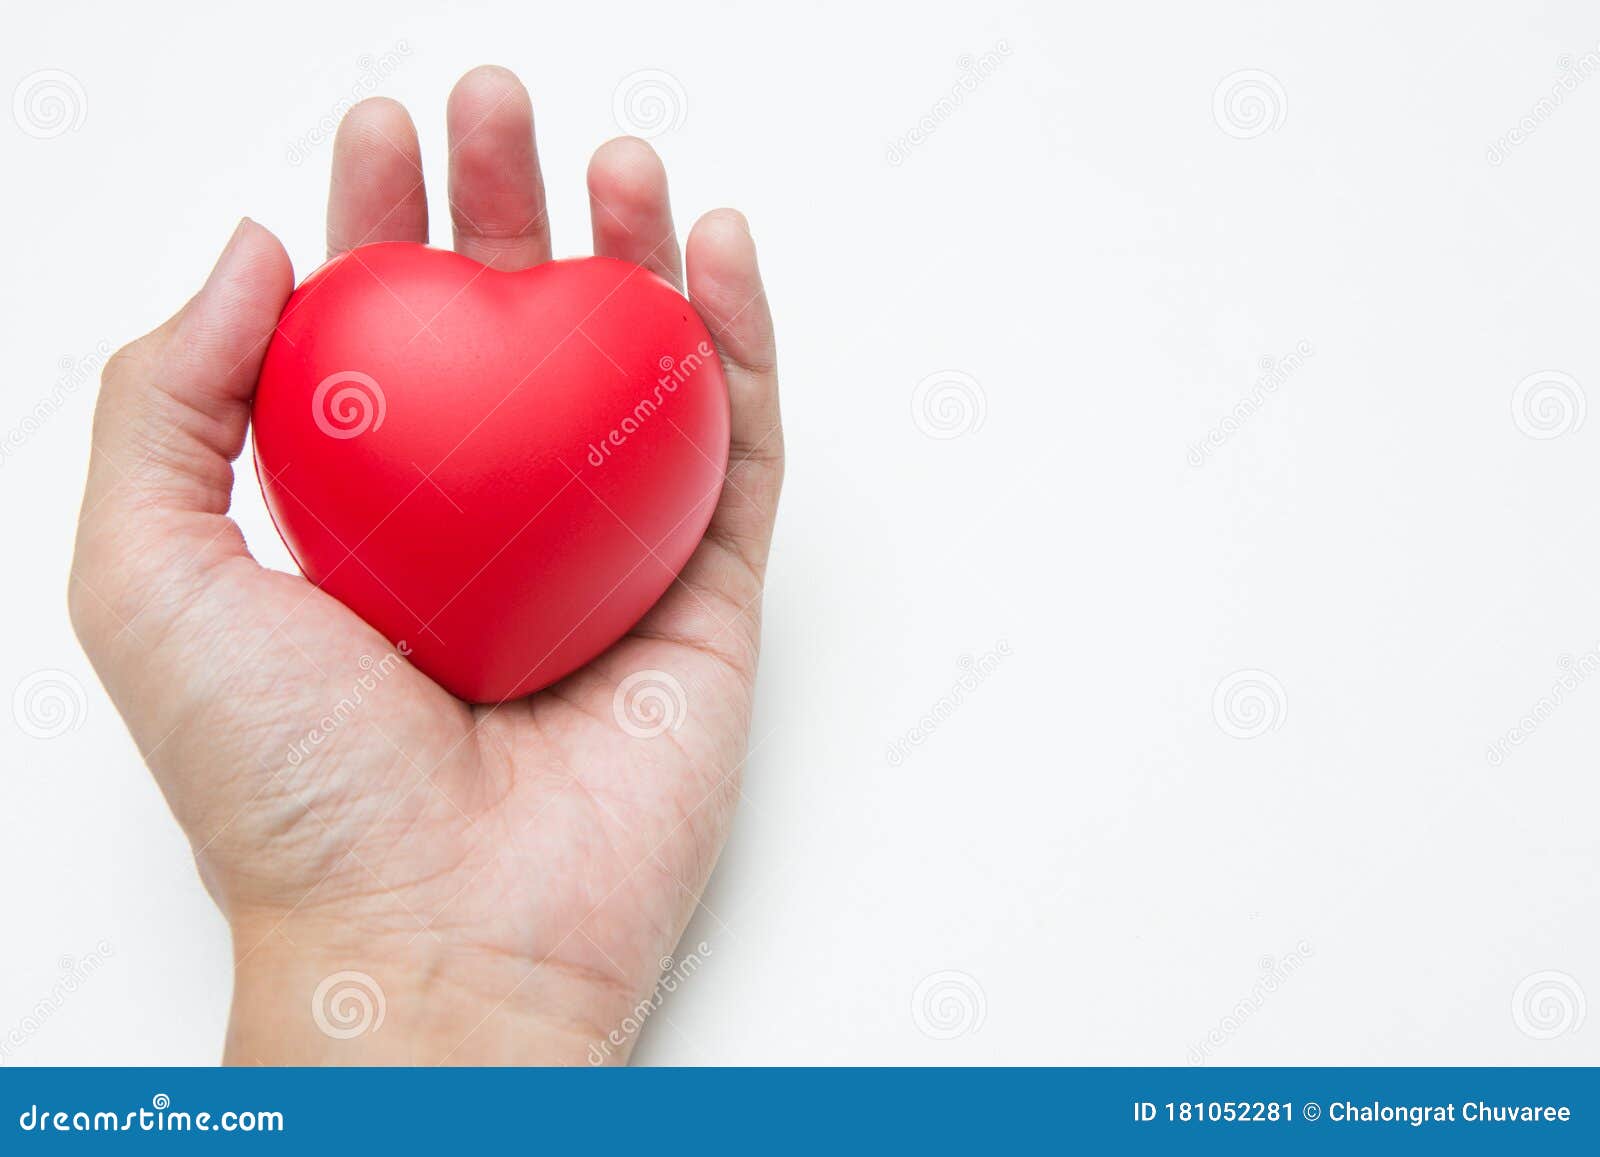 The Hand is Holding Heart Shaped Squeeze Ball for Hand Muscle